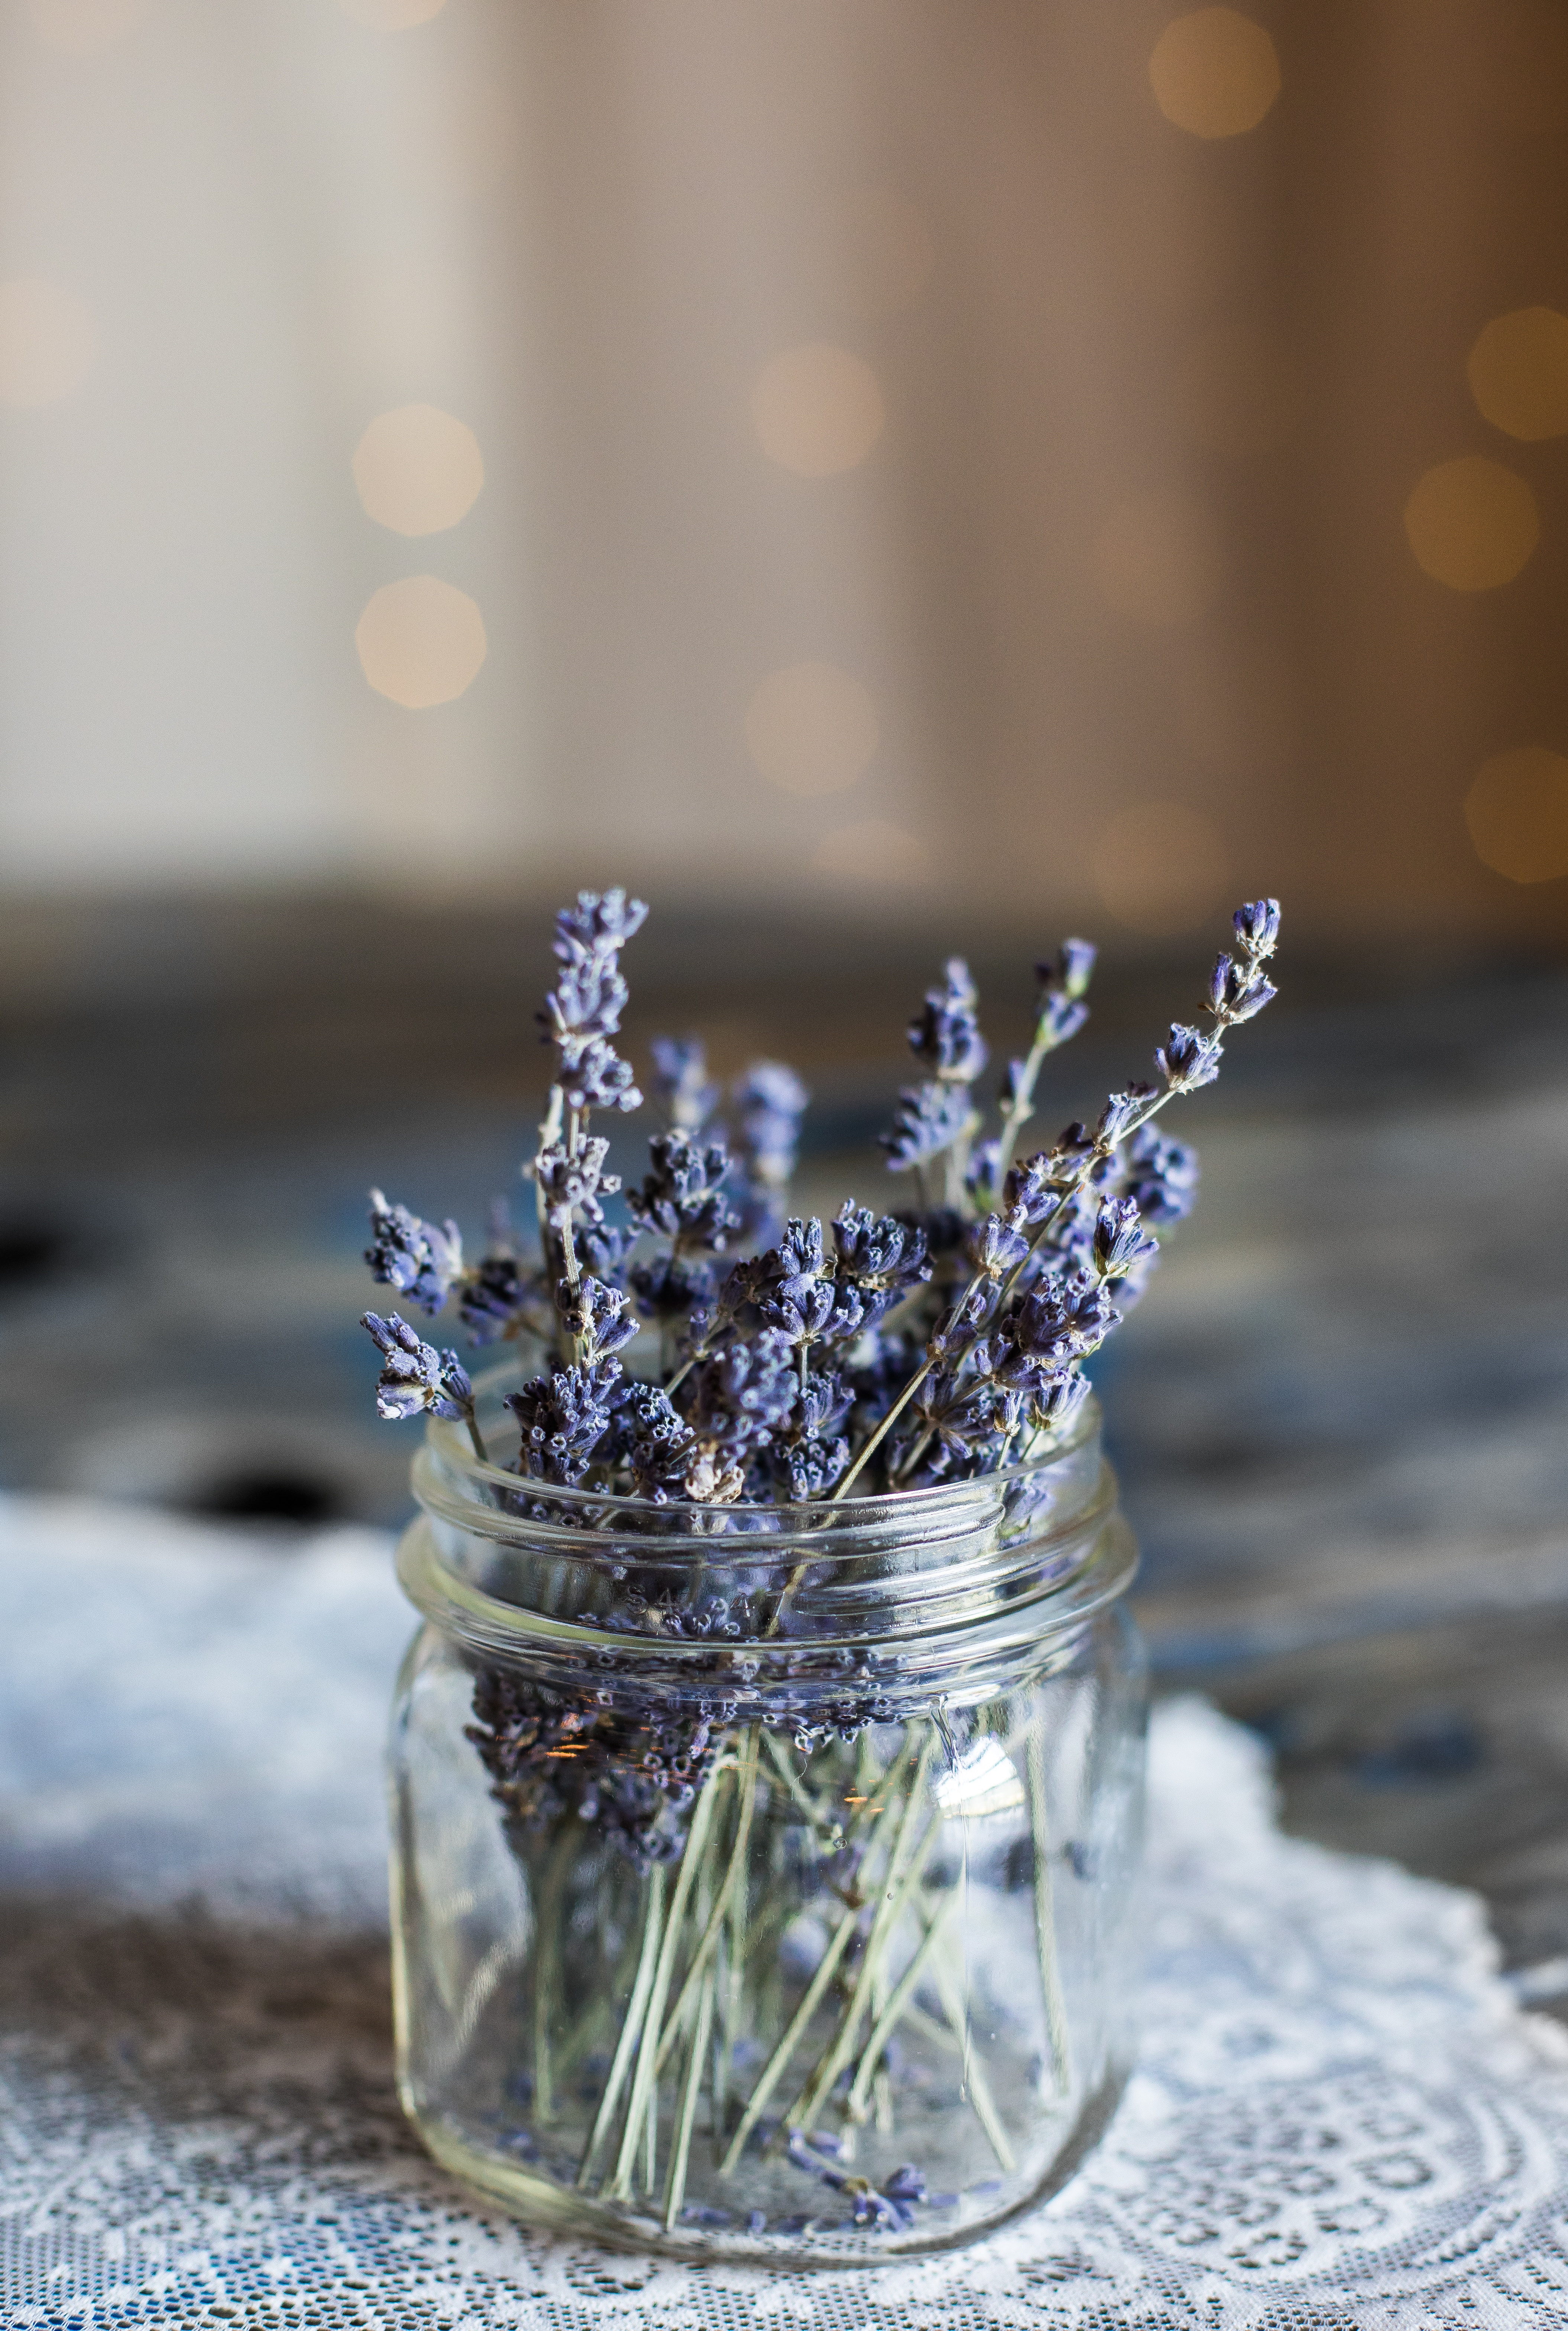 selective focus photography of blue petaled flowers in clear glass jar